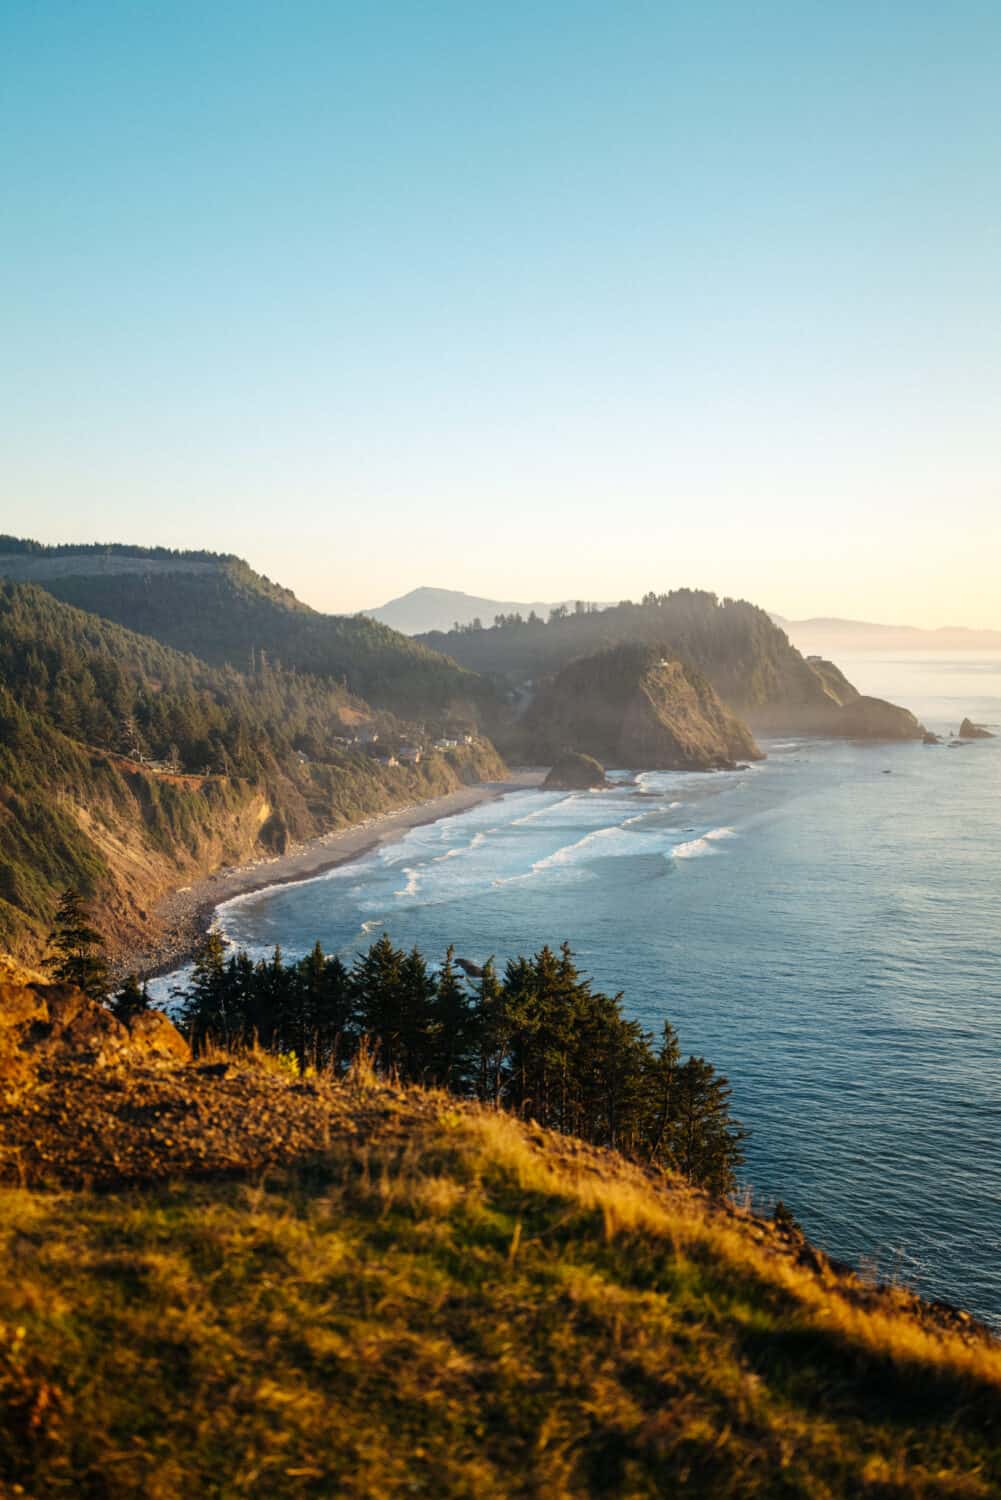 Cape Meares State Scenic Viewpoint at Sunset